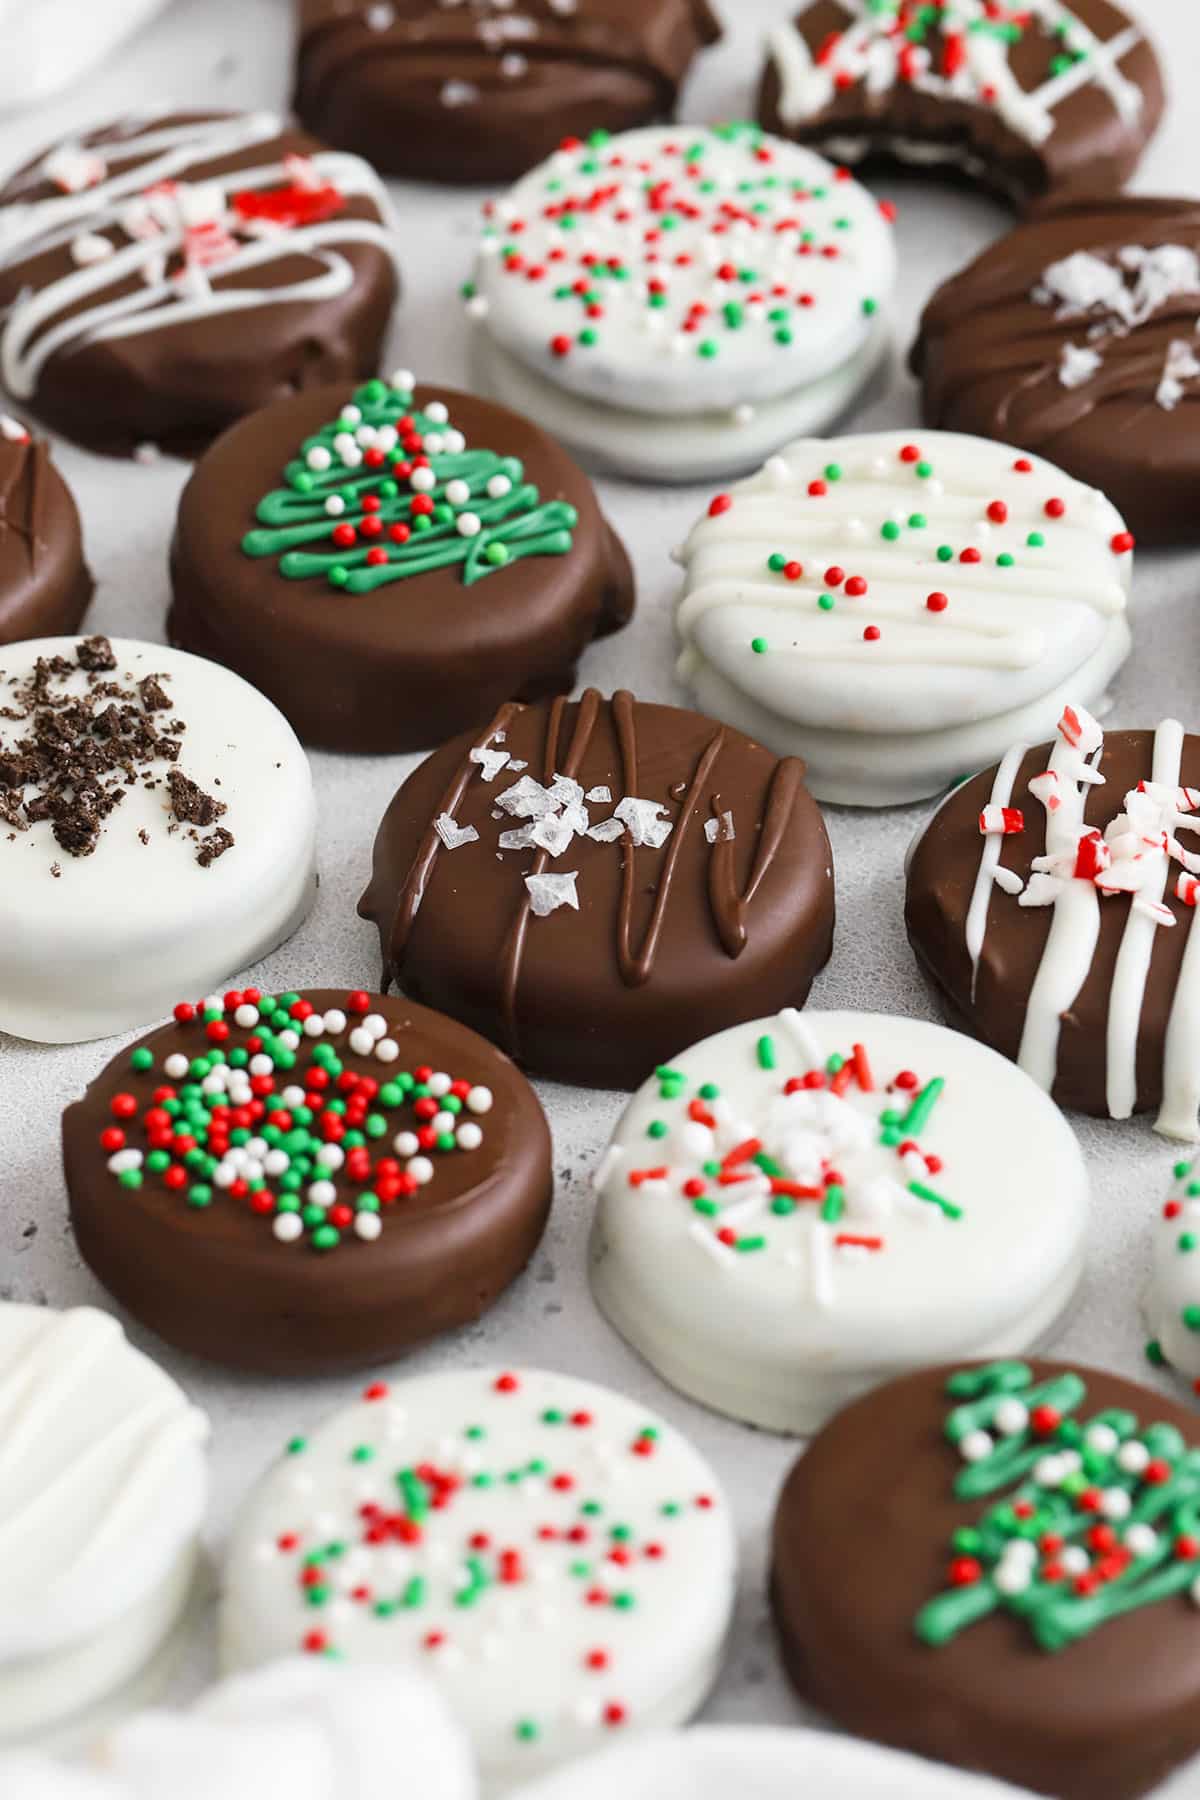 Gluten-Free Chocolate Covered Oreos decorated with different toppings